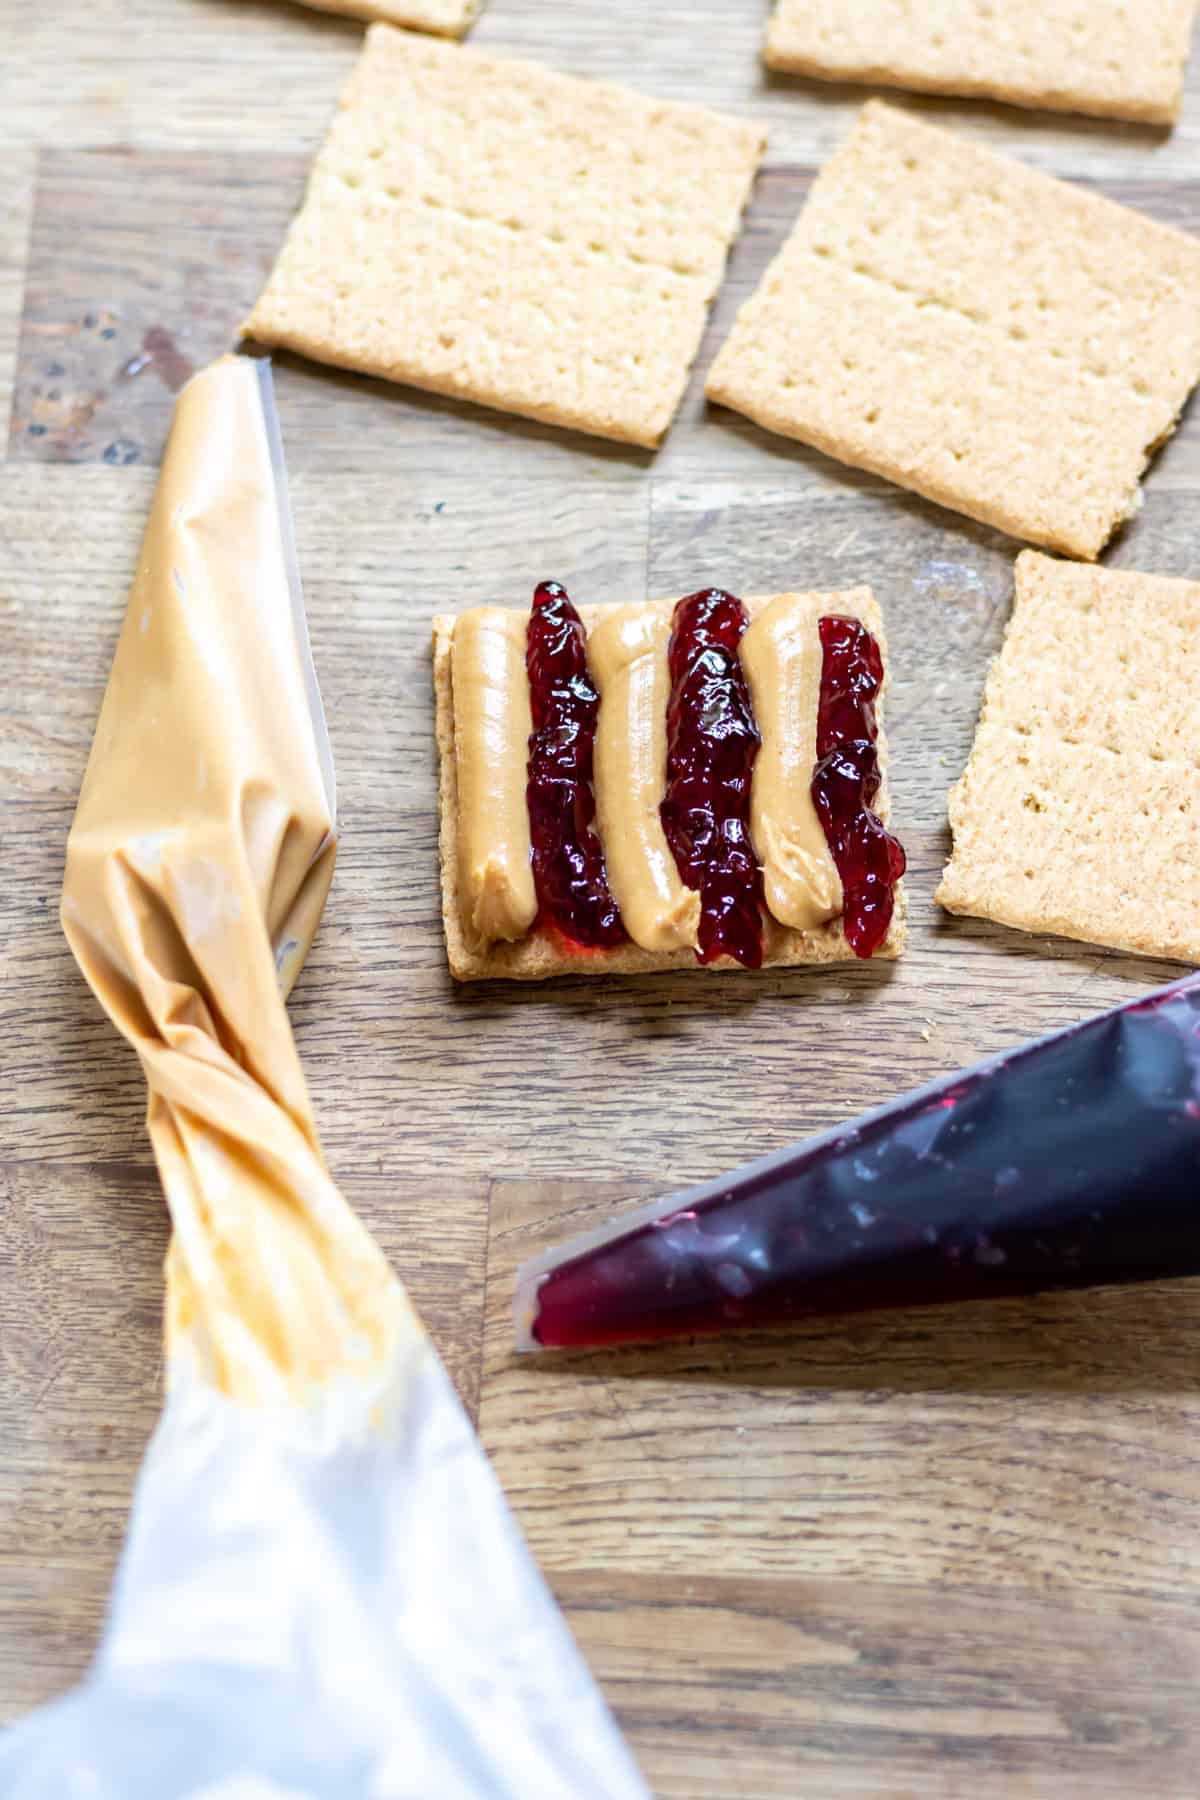 A graham cracker with piped strips of peanut butter and grape jelly.